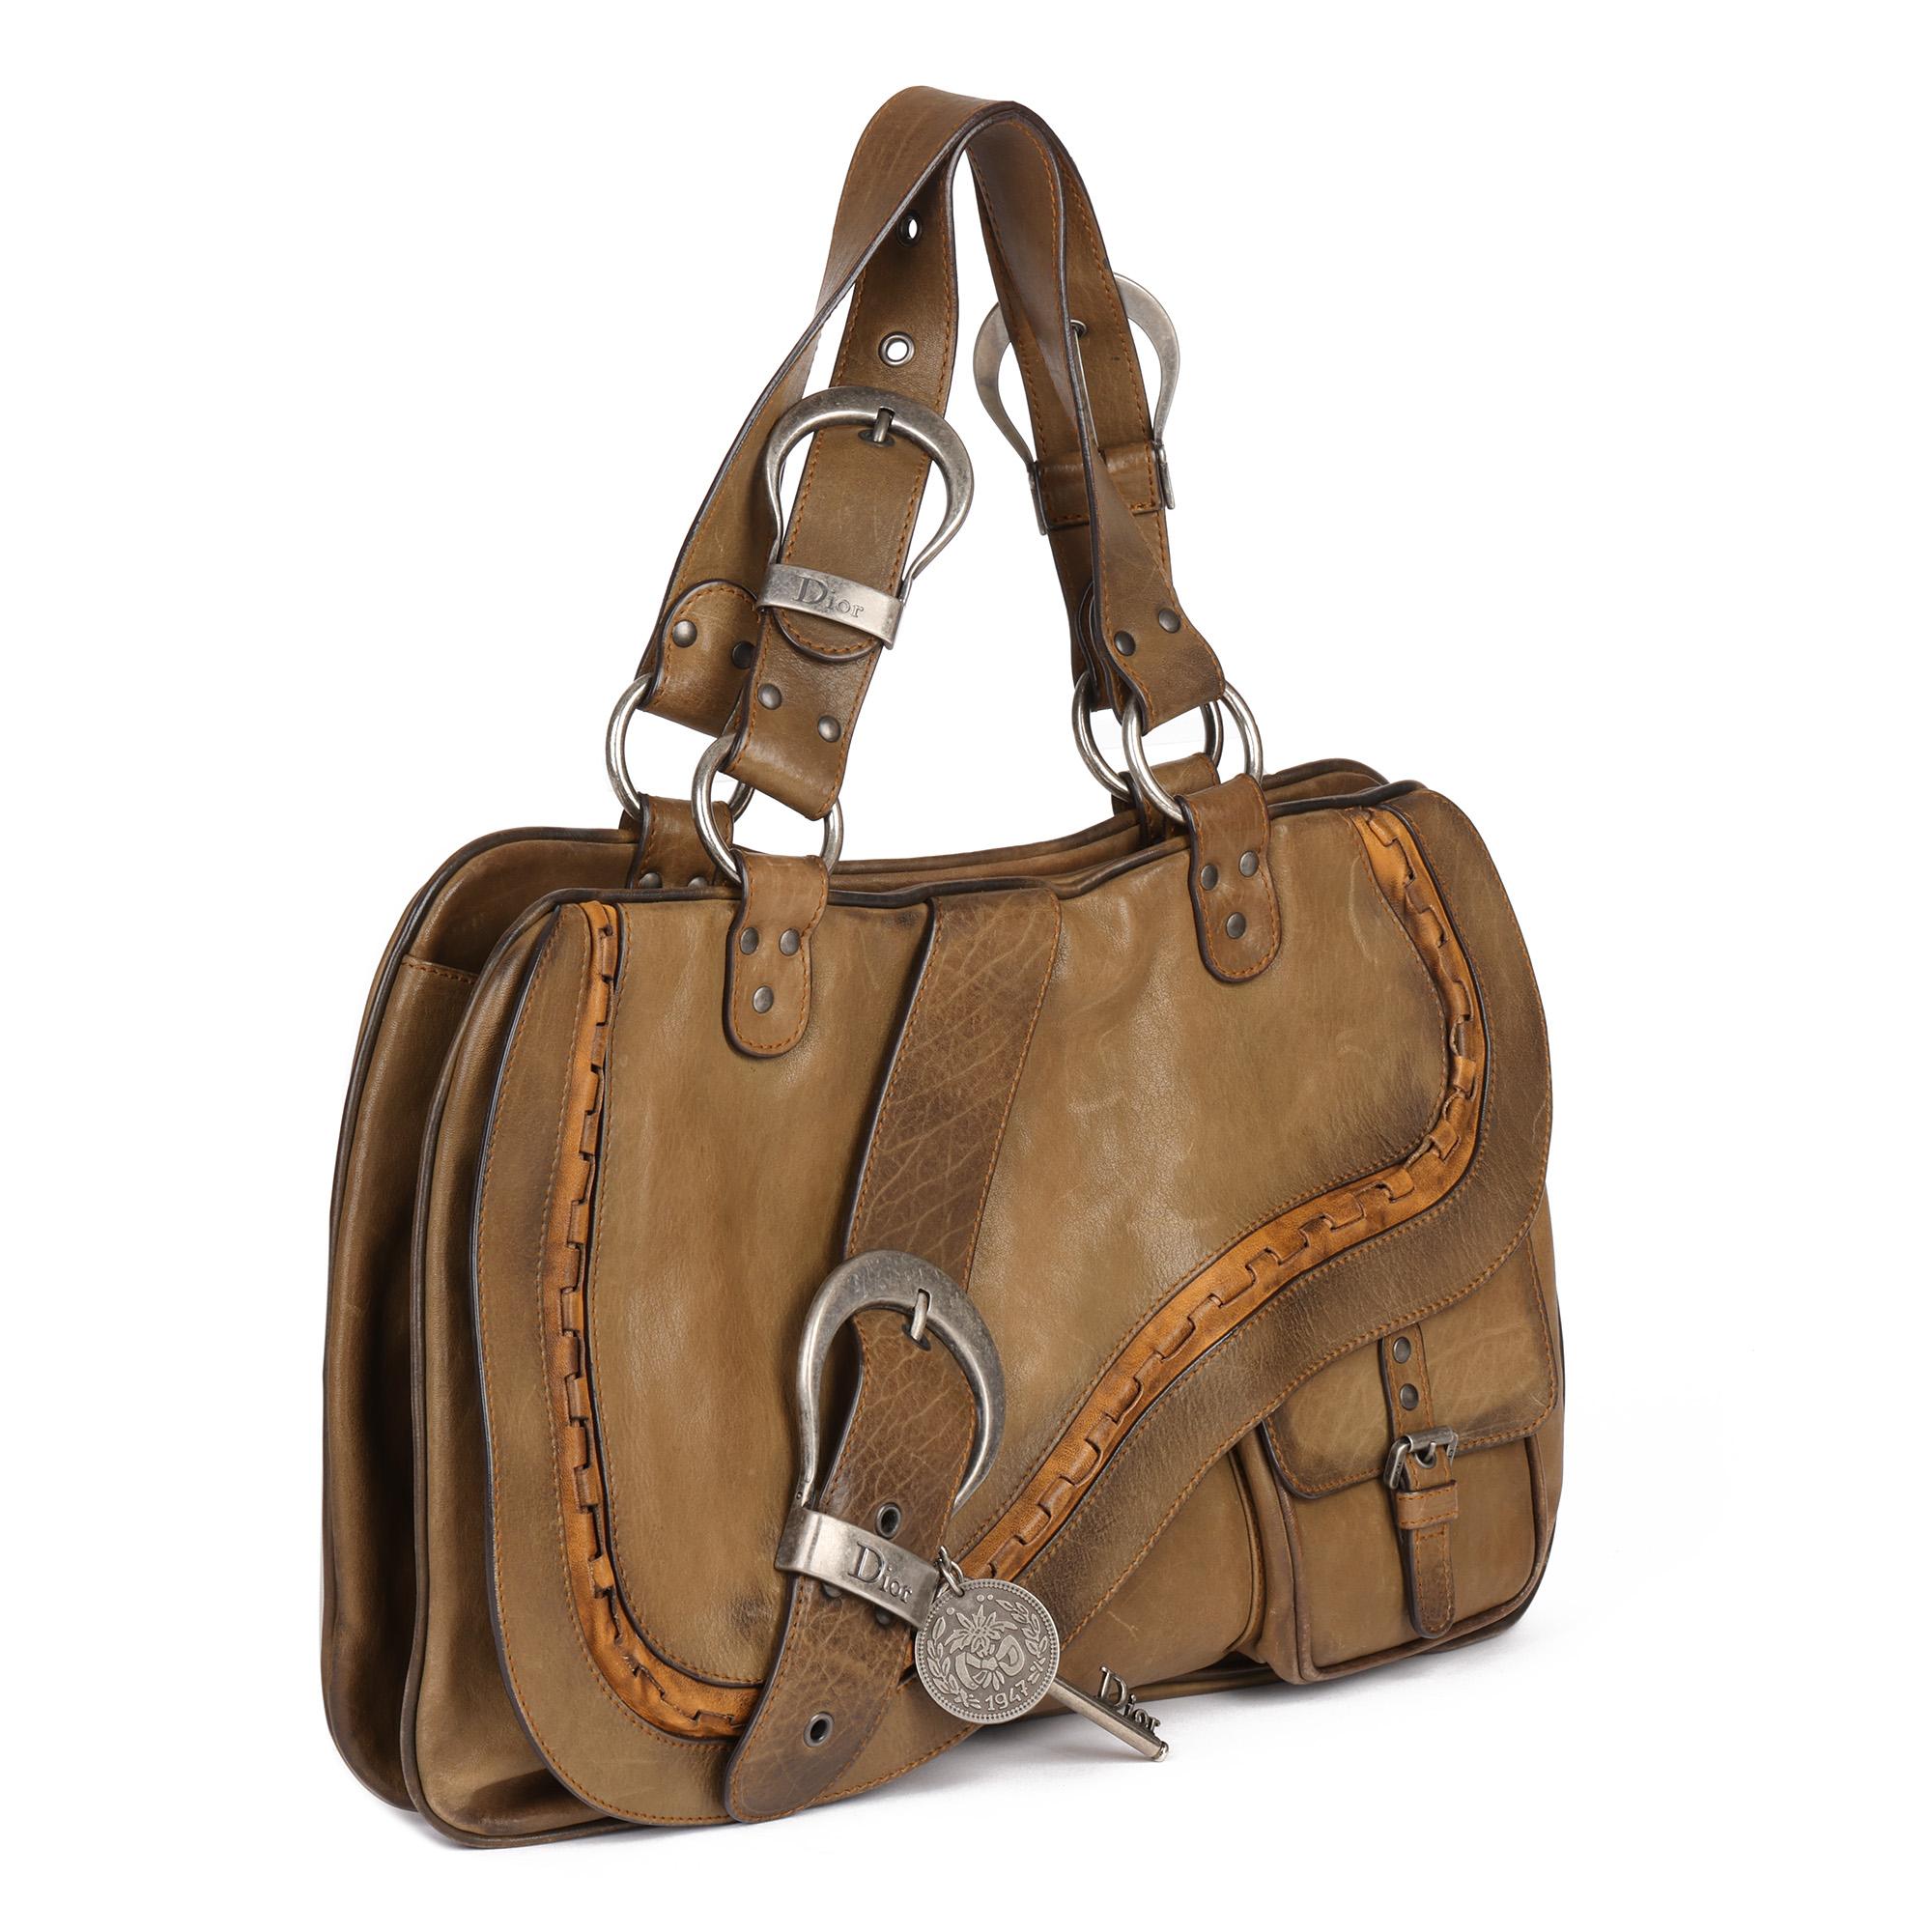 CHRISTIAN DIOR
Brown Aged Calfskin Leather Gaucho Double Saddle Bag

Xupes Reference: CB408
Serial Number: 06-MA-0096
Age (Circa): 2006
Accompanied By: Dior Dust Bag, Care Booklet
Authenticity Details: Date Stamp (Made in Italy)
Gender: Ladies
Type: